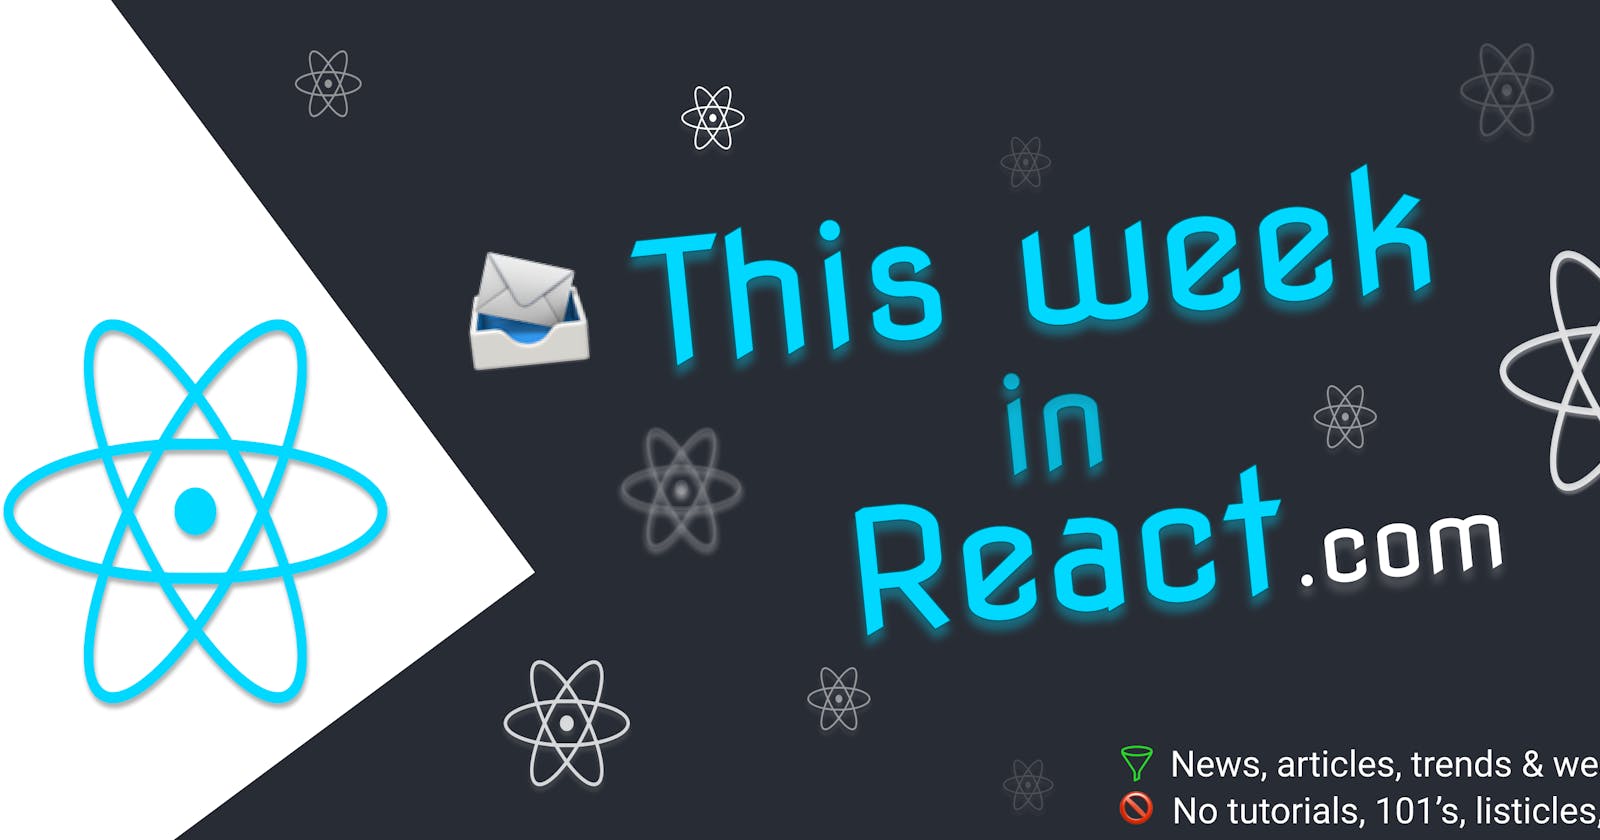 This Week In React #166: Server Components, Waku, React-Forget, React-Native, Million, Remotion, Next.js, Storybook, Remix, AuthKit, Expo Router...